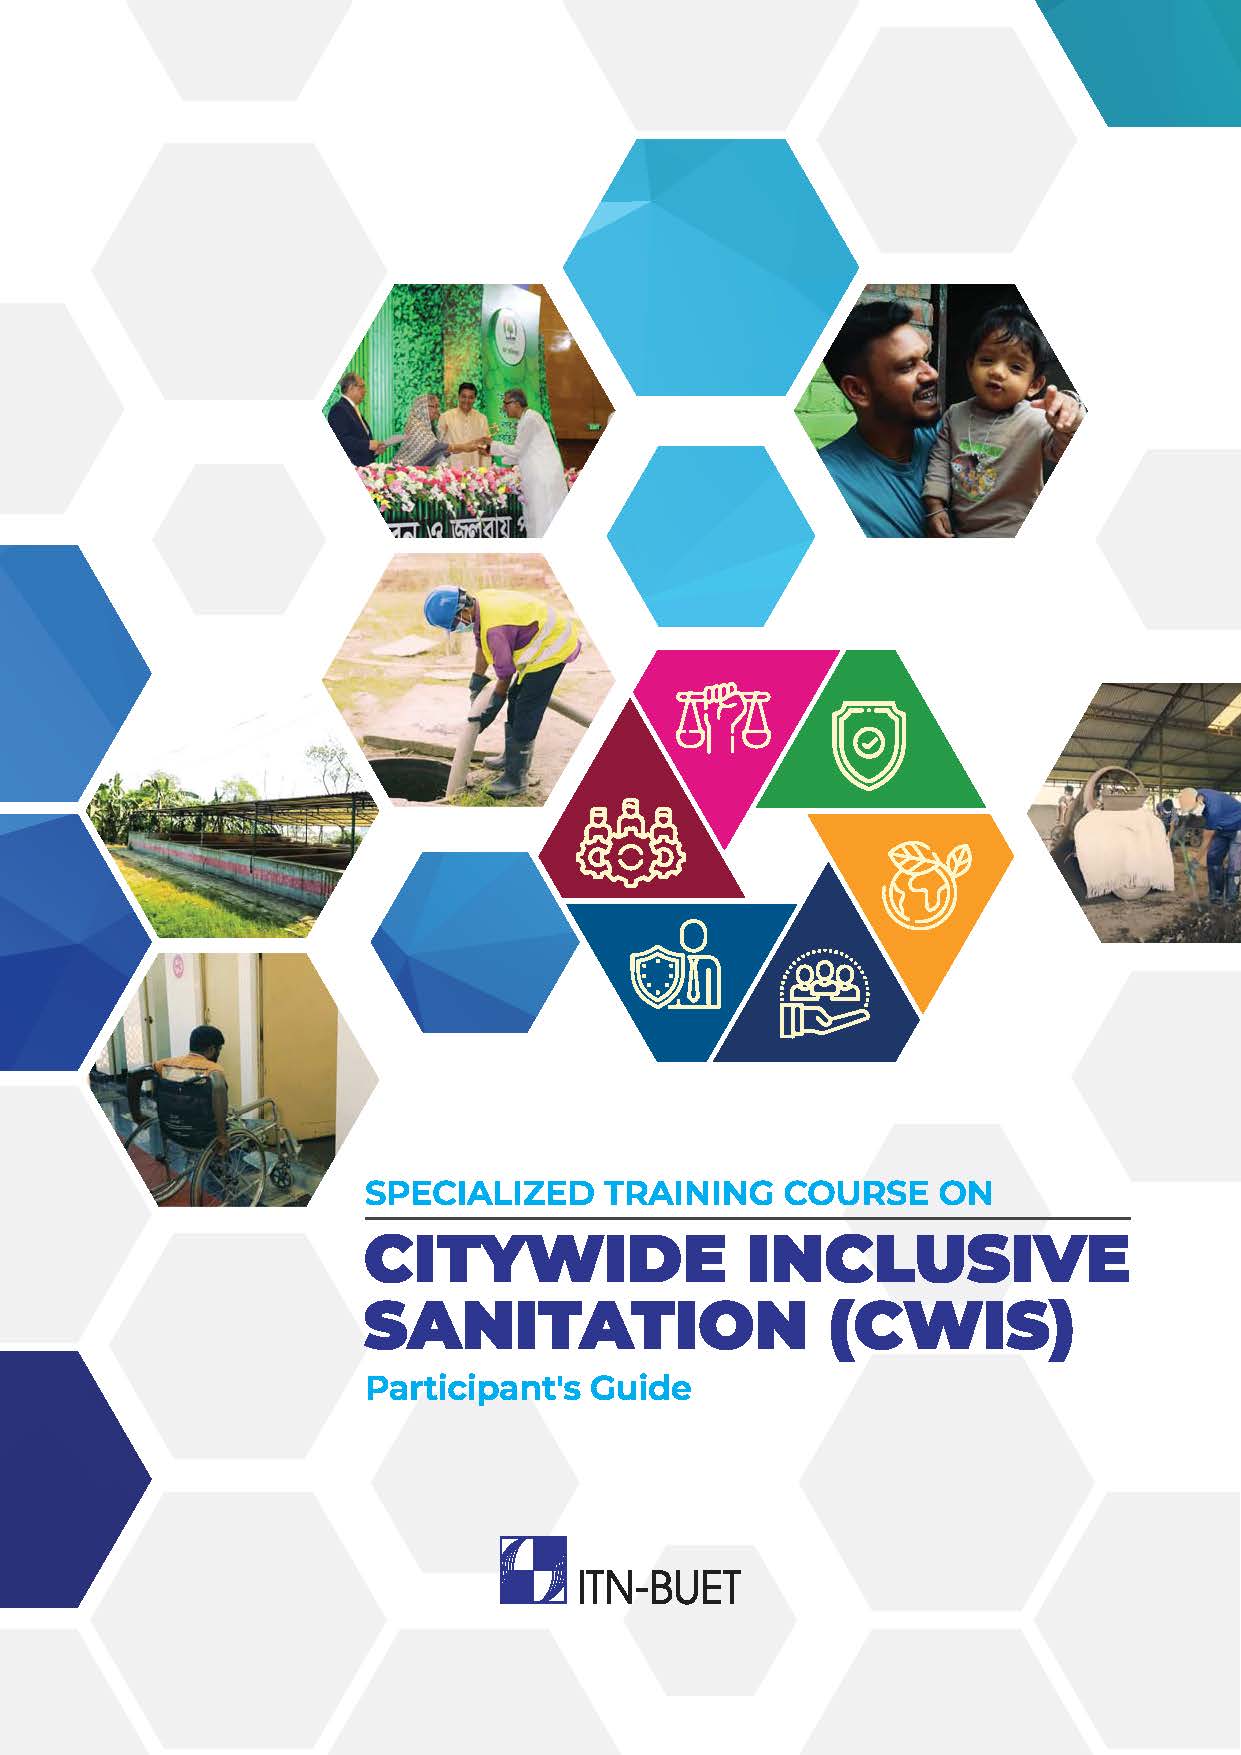 Specialized Training Course on Citywide Inclusive Sanitation (CWIS) Participant’s Guide